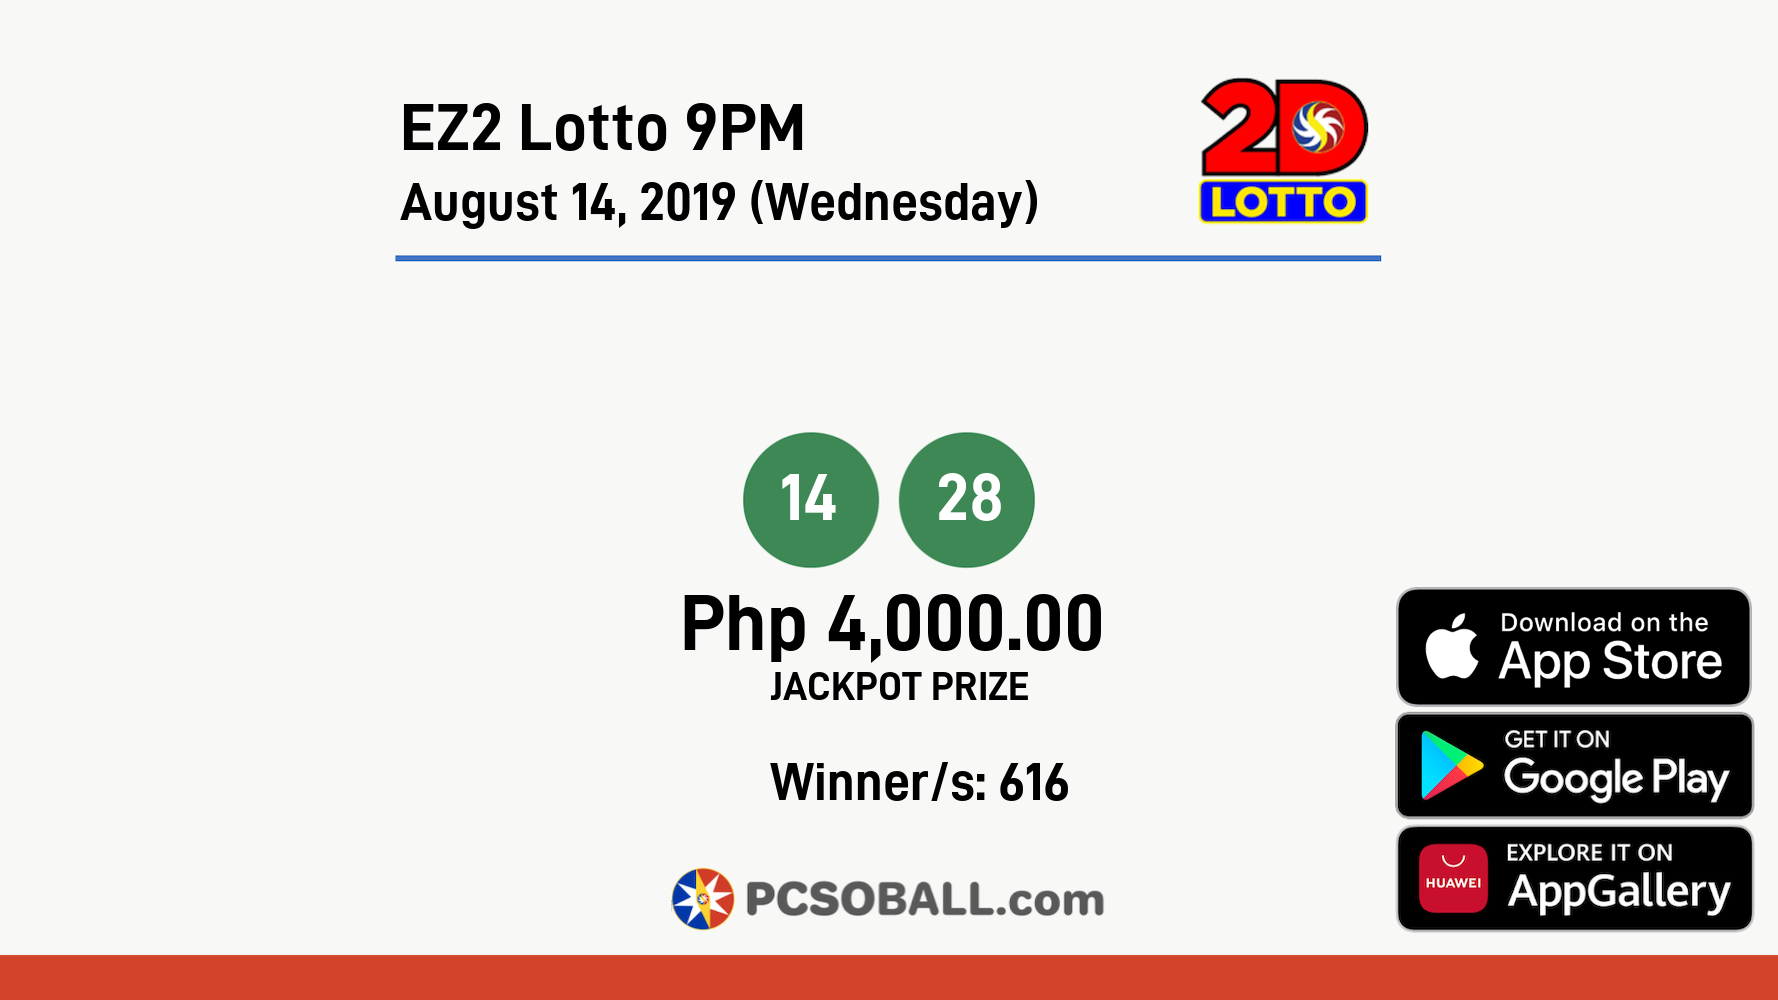 EZ2 Lotto 9PM August 14, 2019 (Wednesday) Result